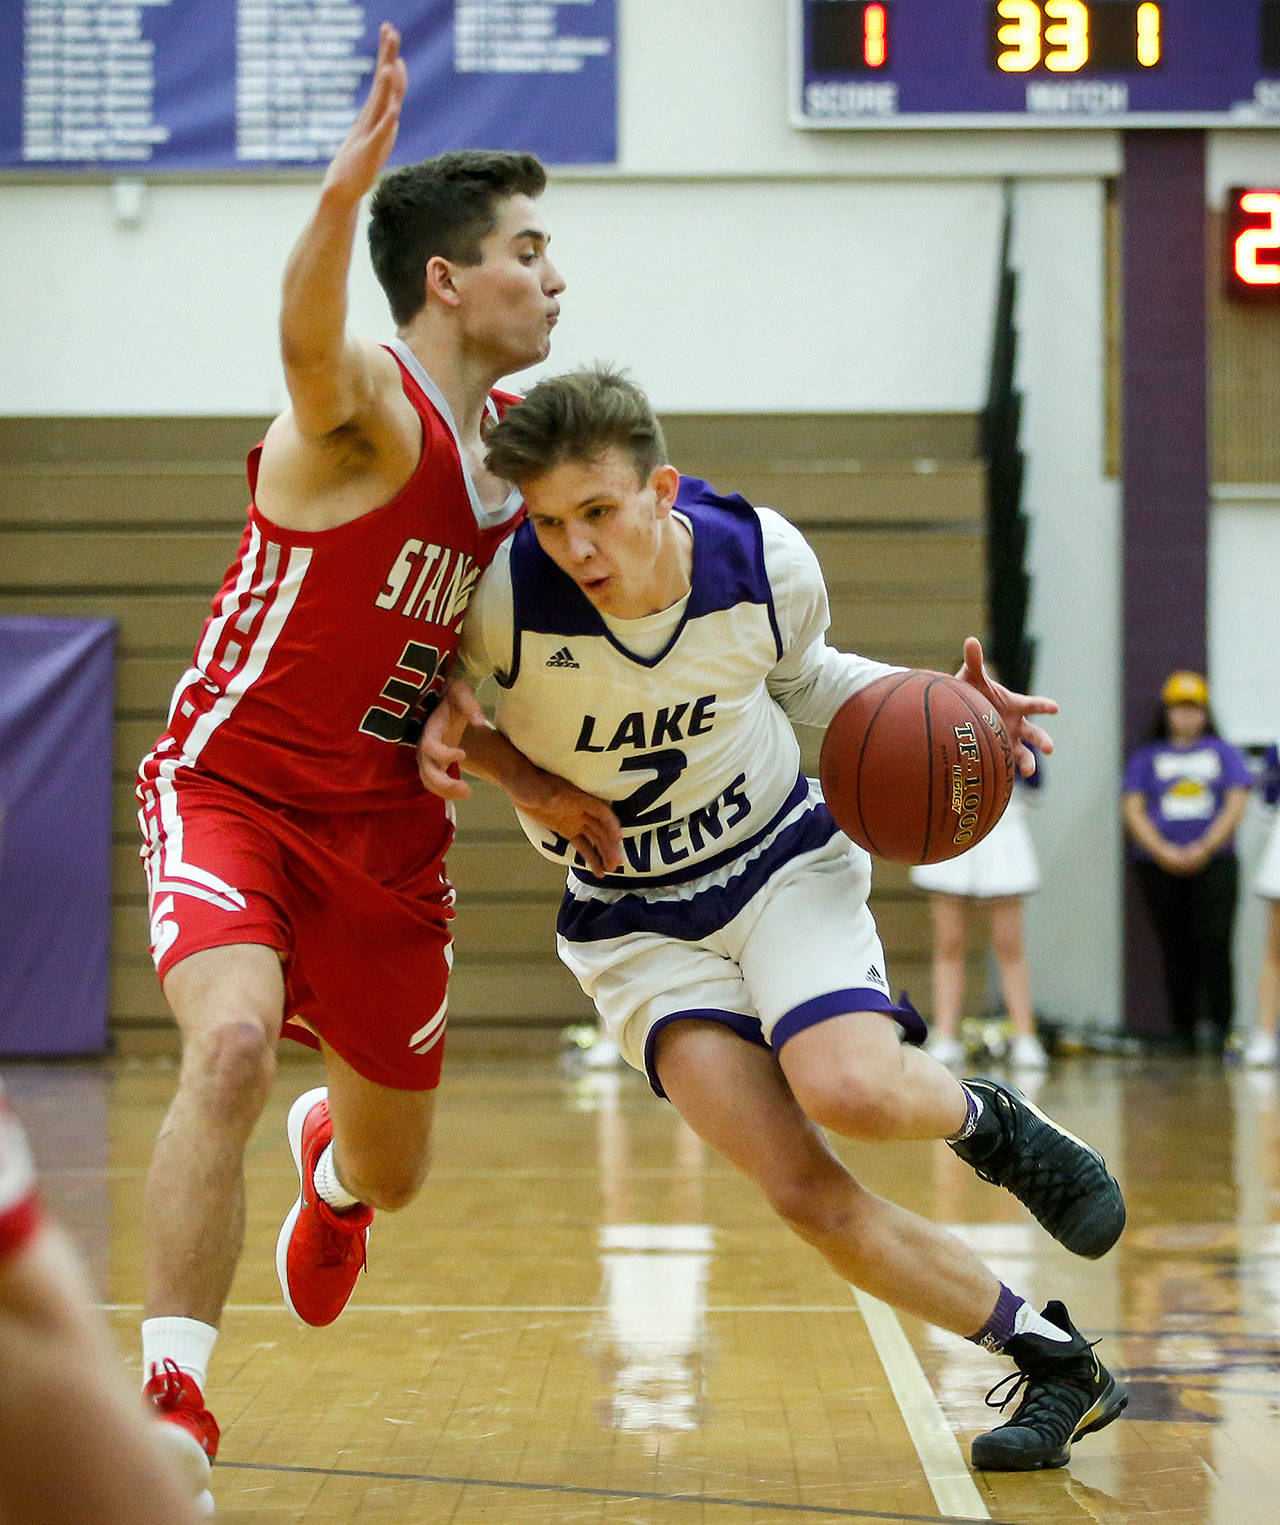 Ryder Kavanagh drives against Stanwood’s Nate Kummer during a non-conference basketball game on Dec. 5, 2017, at Lake Stevens High School. Kavanagh earned first-team Wesco 4A honors and Kummer was named to the Wesco 3A/2A second team. (Ian Terry / The Herald)